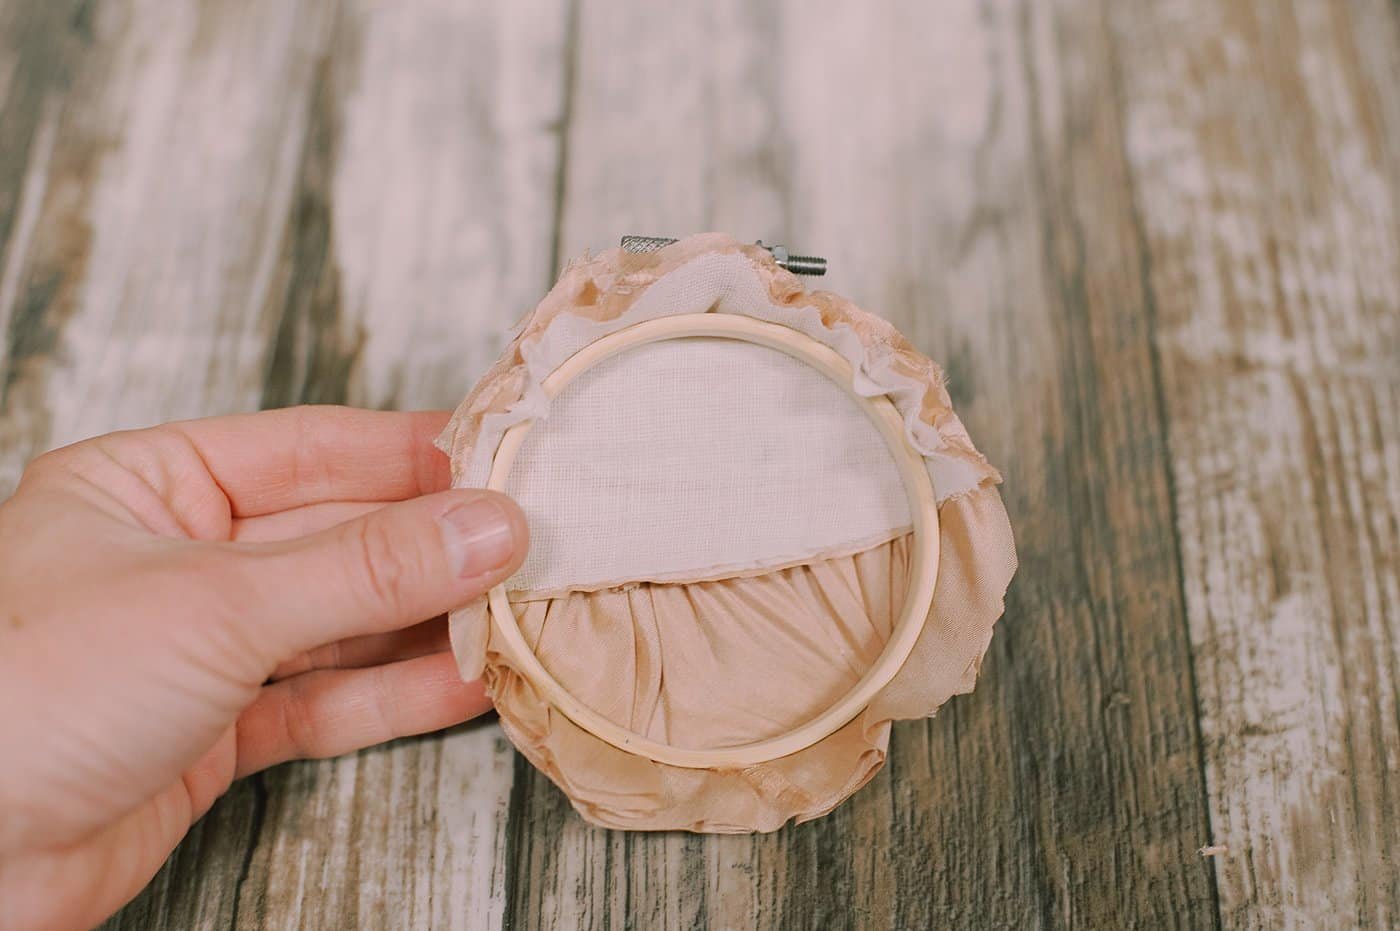 Trim the extra fabric around the edge of the embroidery hoop.